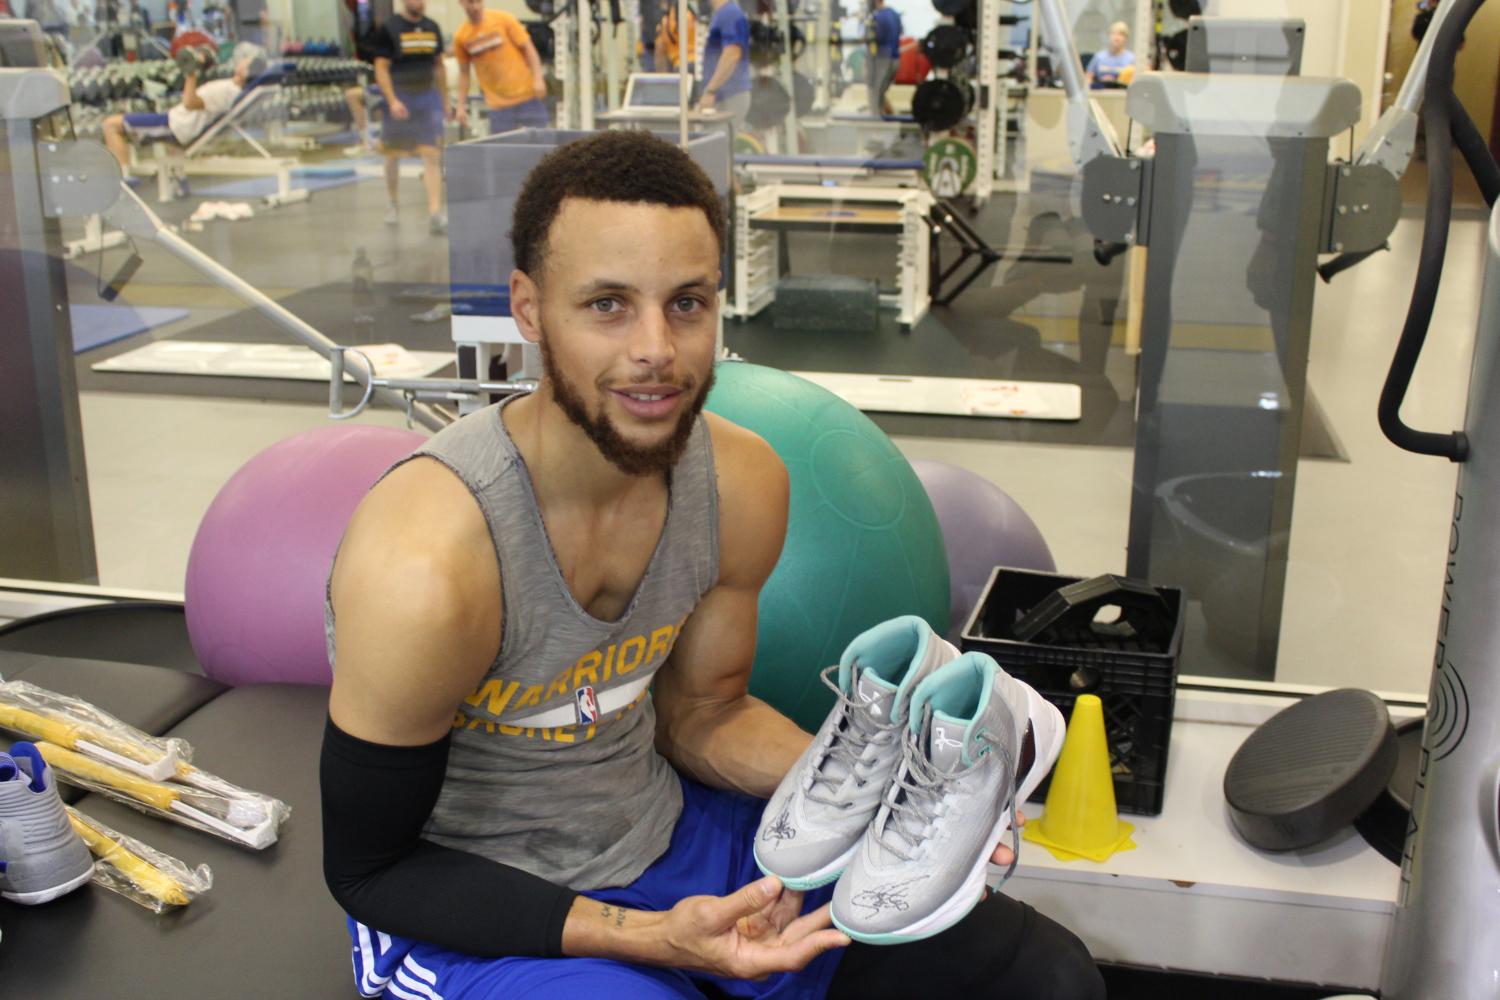 Photo by Rachel Hildebrand. Curry with Nuestro’s signed shoes after practice today